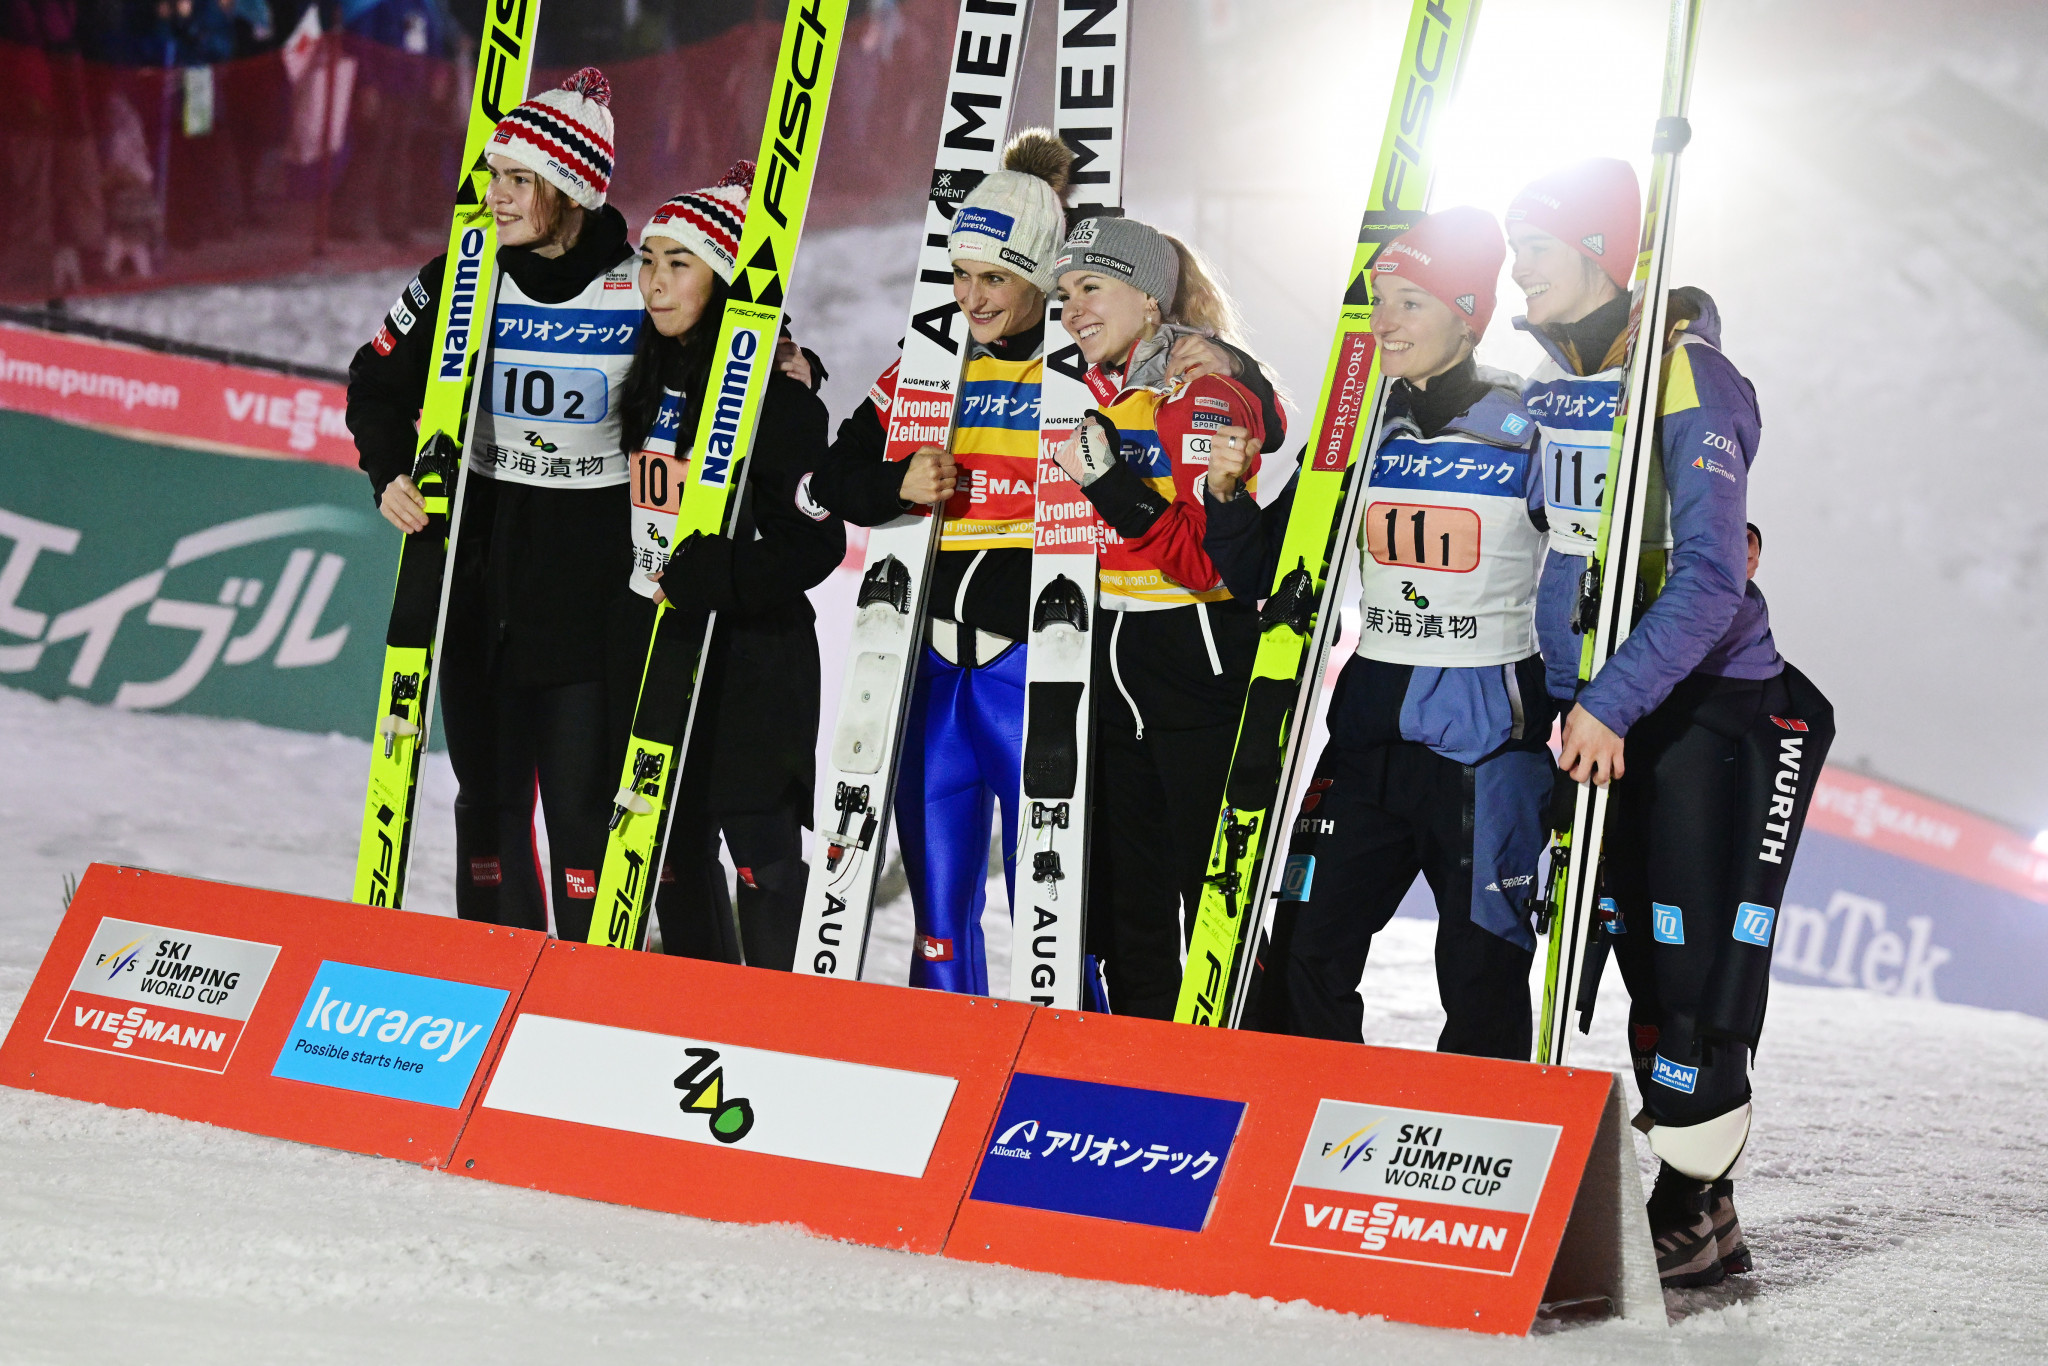 Austria claim women’s team title at Ski Jumping World Cup in Zao